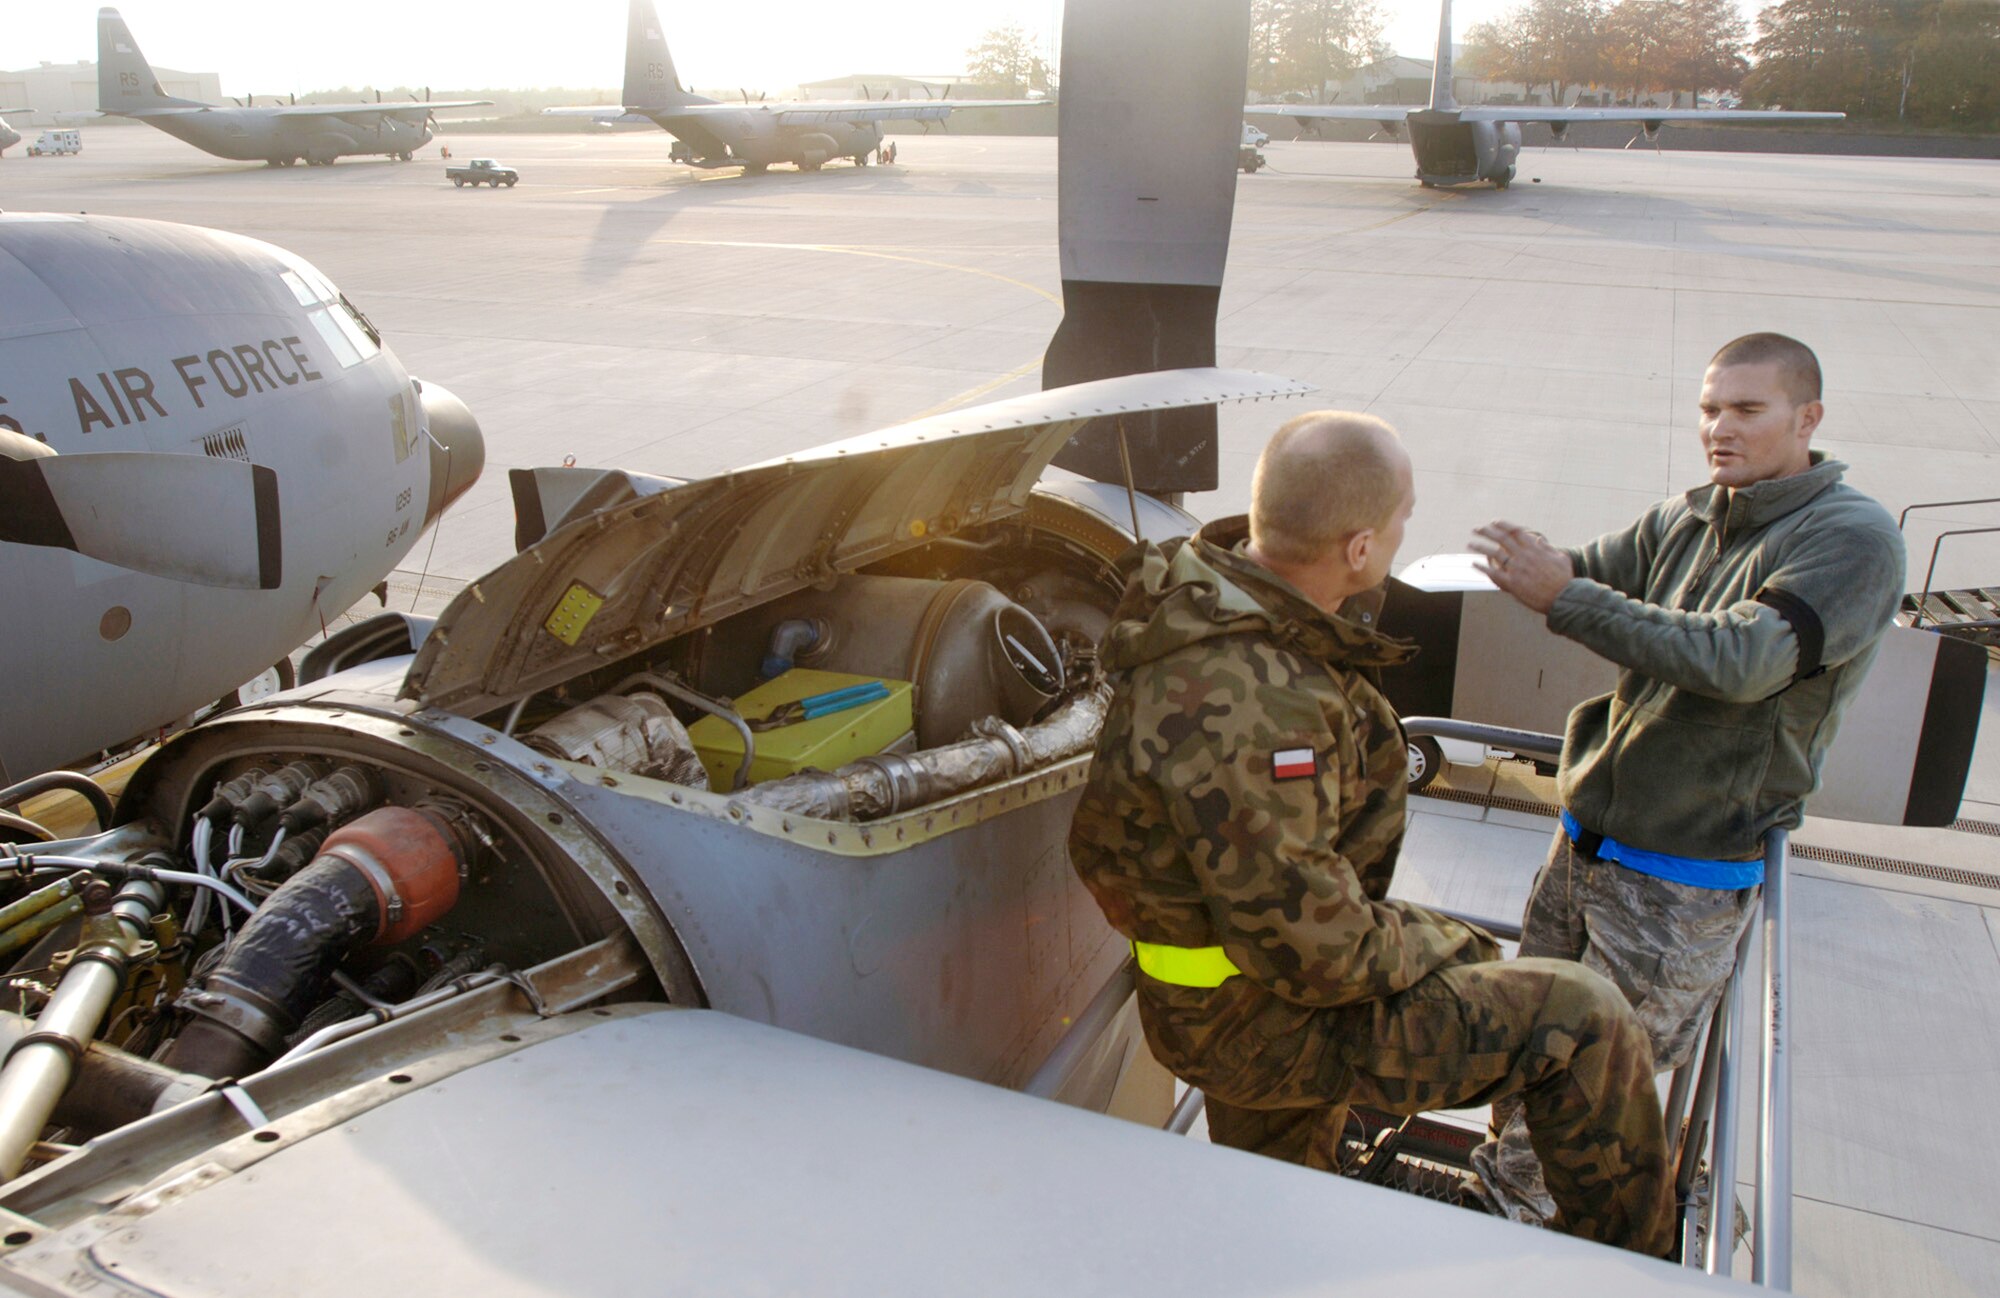 Staff Sgt. Matthew Parker works with Polish air force Chief Warrant Officer Daniel Orlowski in tracing an electrical problem on the No. 4 engine of the last in a series of E-model C-130 Hercules aircraft Oct. 29, 2009, at Ramstein Air Base, Germany. The two mechanics, assigned to the 86th Aircraft Maintenance Squadron and 33rd Air Base Group, respectively, were completing a week-long home station check before the aircraft is transferred to the Polish air force's 14th Airlift Squadron at Powidz Air Base, Poland, as part of a program for building partnership capacities between the United States and its allies. (Defense Department photo/Master Sgt. Scott Wagers)